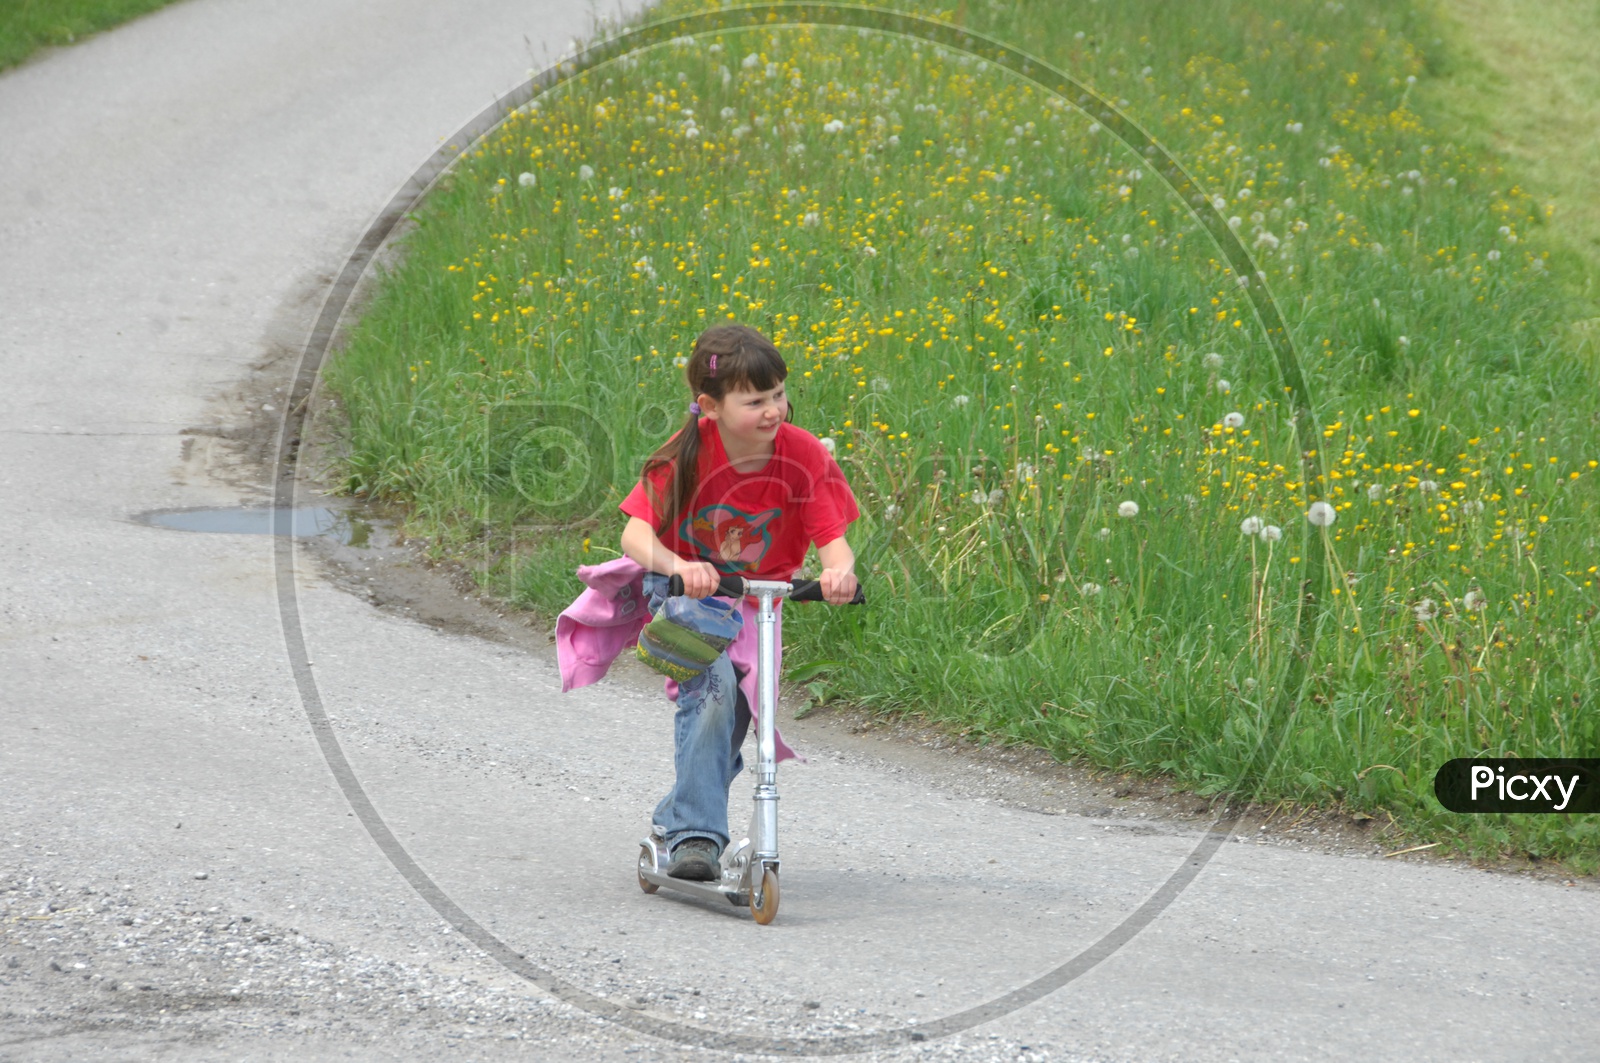 Girl Child Playing With a Skateboard Bike